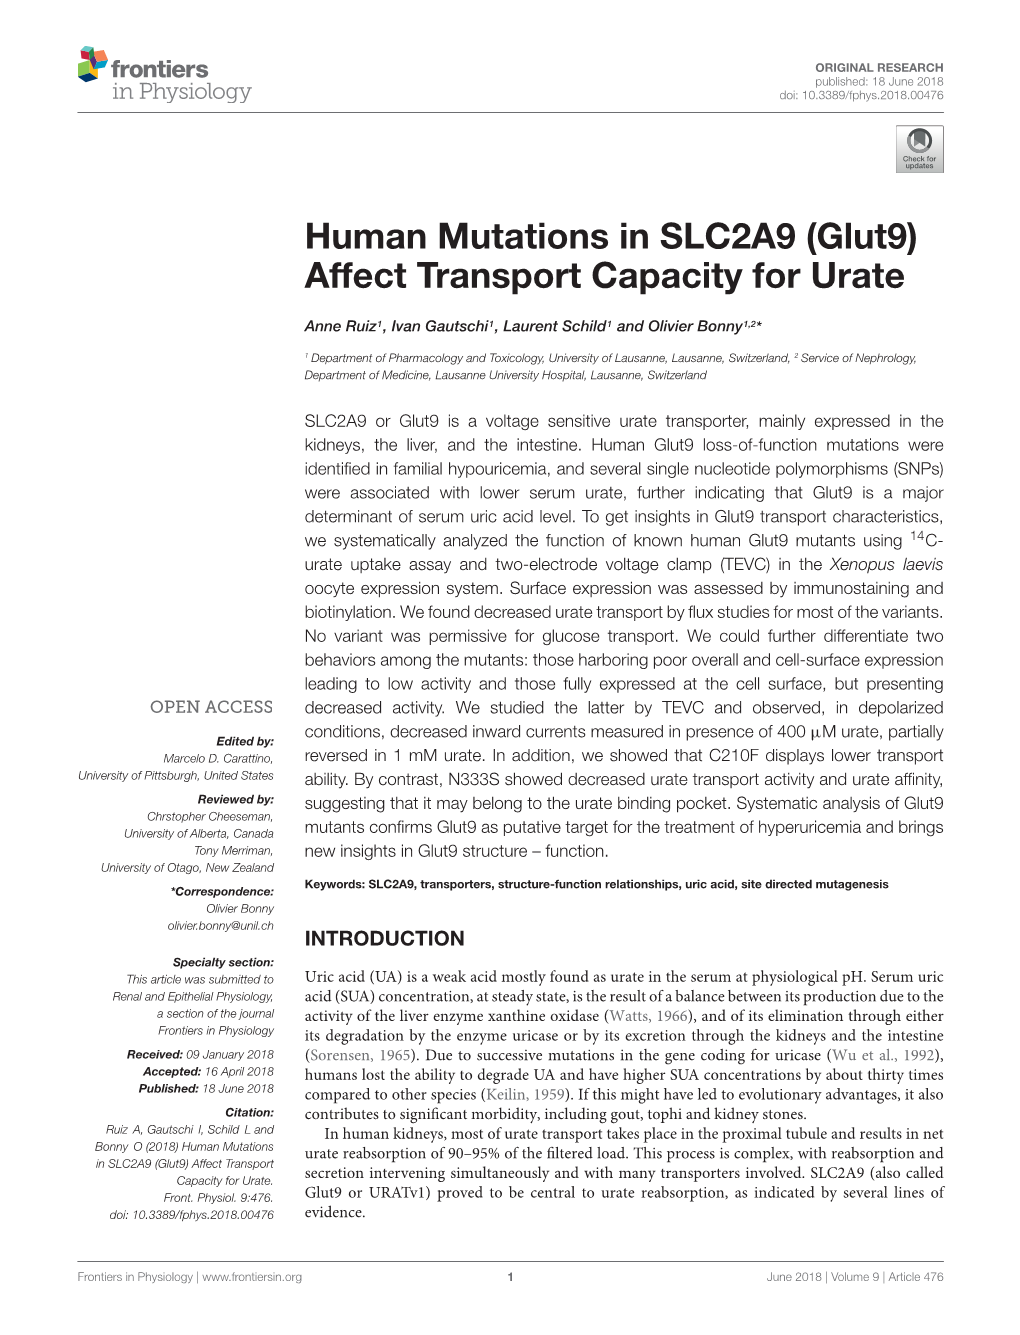 Human Mutations in SLC2A9 (Glut9) Affect Transport Capacity for Urate